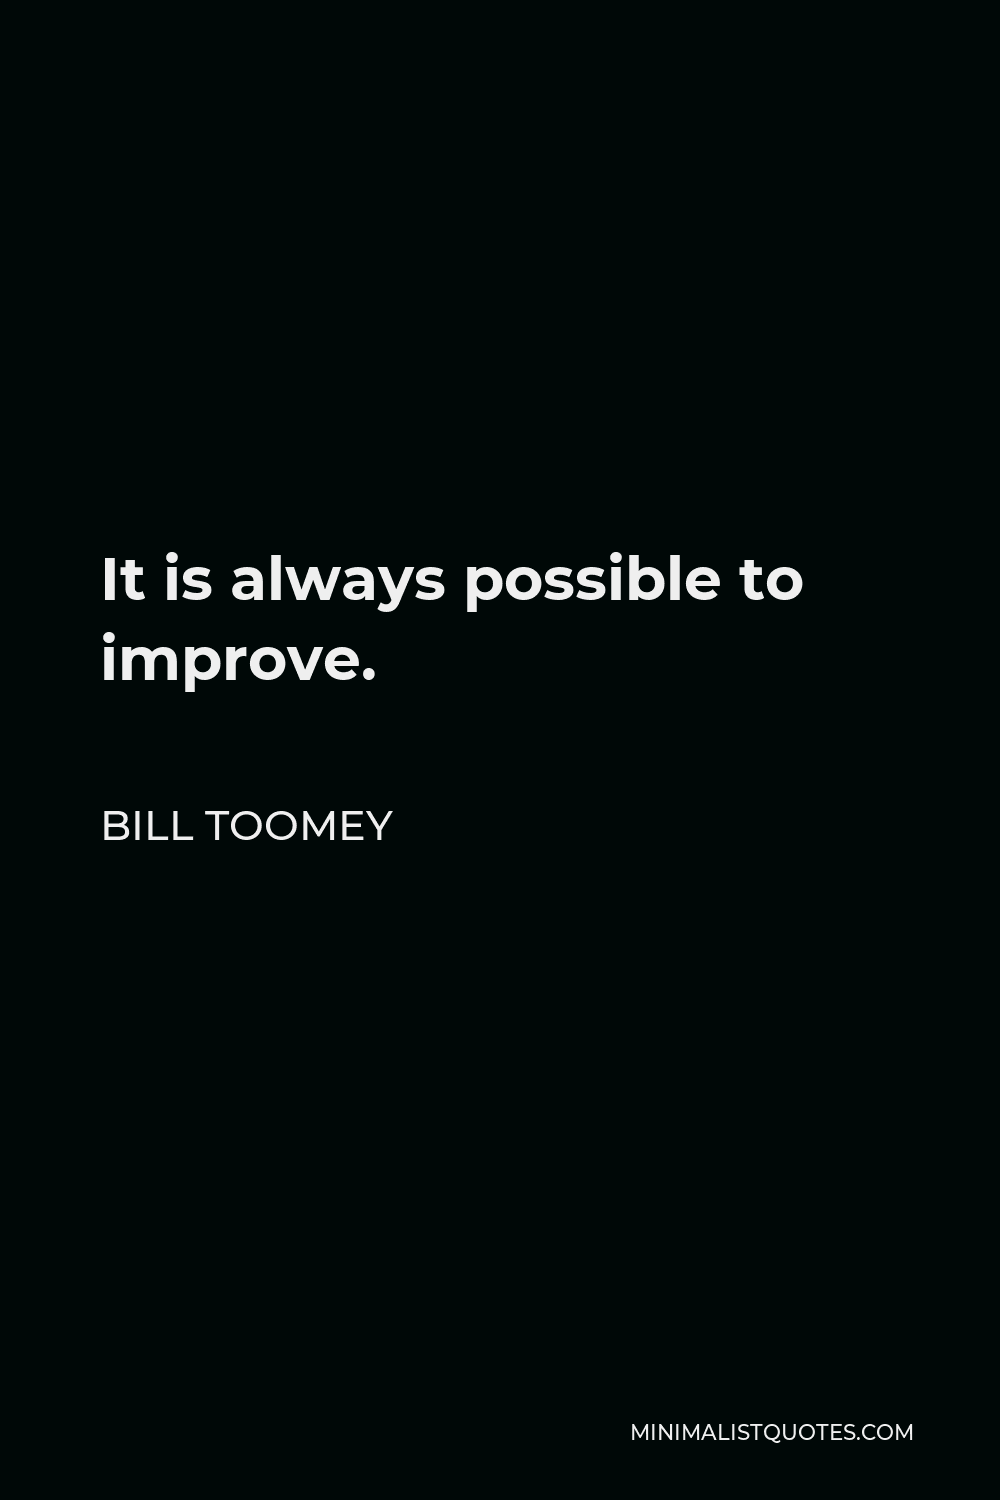 Bill Toomey Quote - It is always possible to improve.